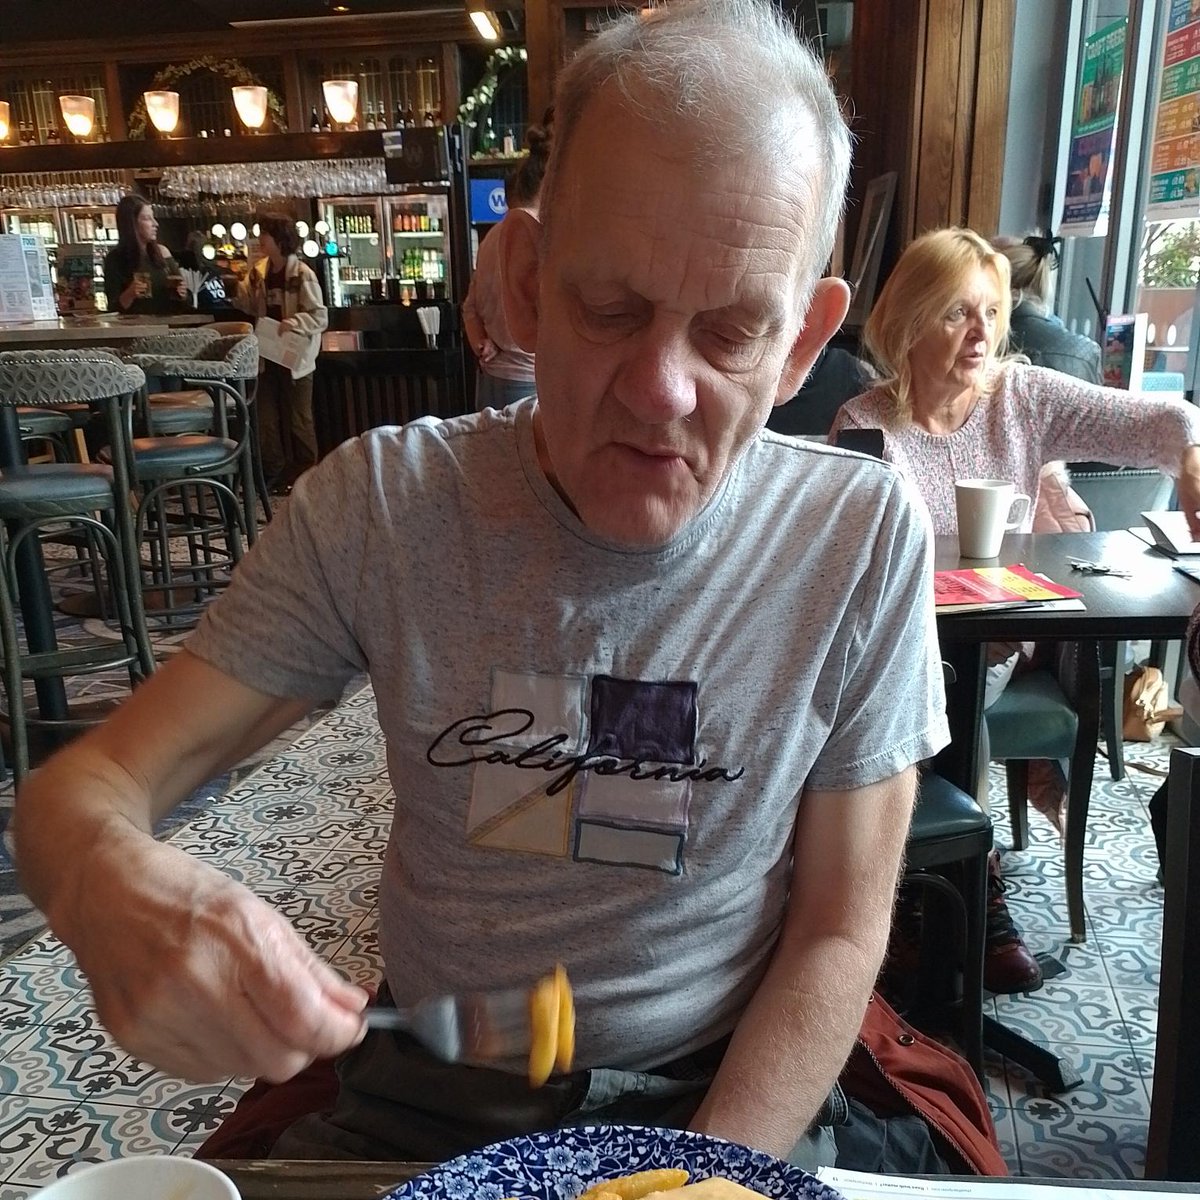 Chris recently enjoyed a pub lunch where he munched a burger and a plate of chips before going on to his horse riding lesson. Afterwards, Chris told us his lesson was 'lovely horse riding' #AutismAcceptenceWeek